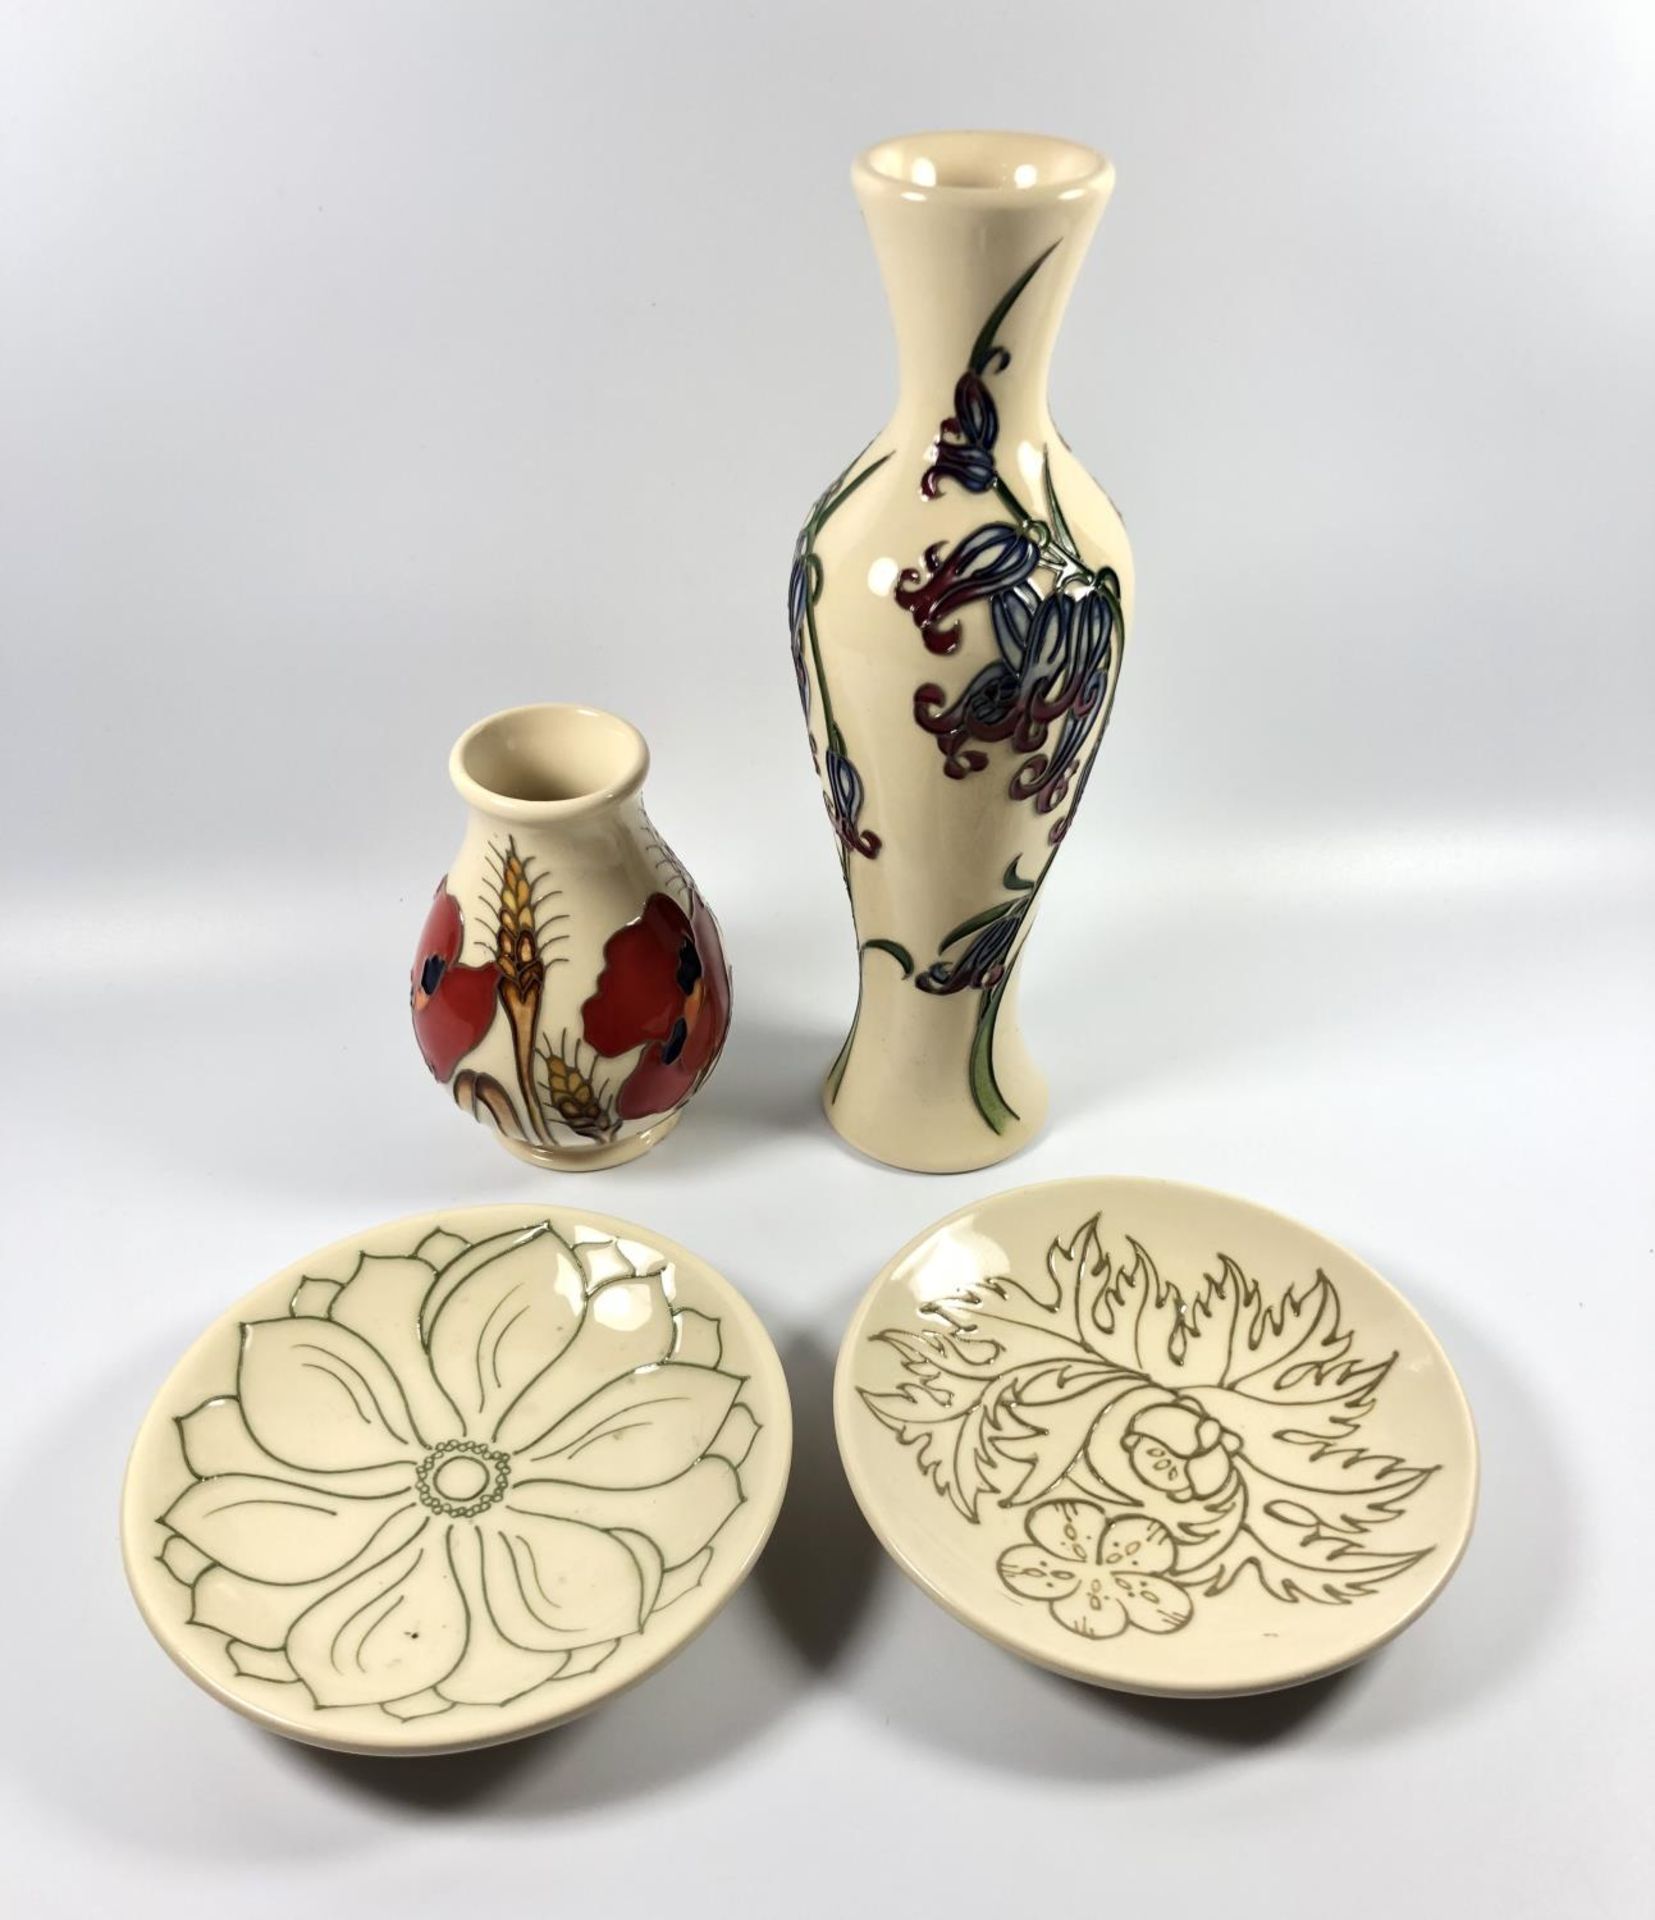 FOUR MOORCROFT POTTERY PIECES - TWO TUBE MASTER PIN DISHES, ONE BLUEBELL HARMONY VASE AND A